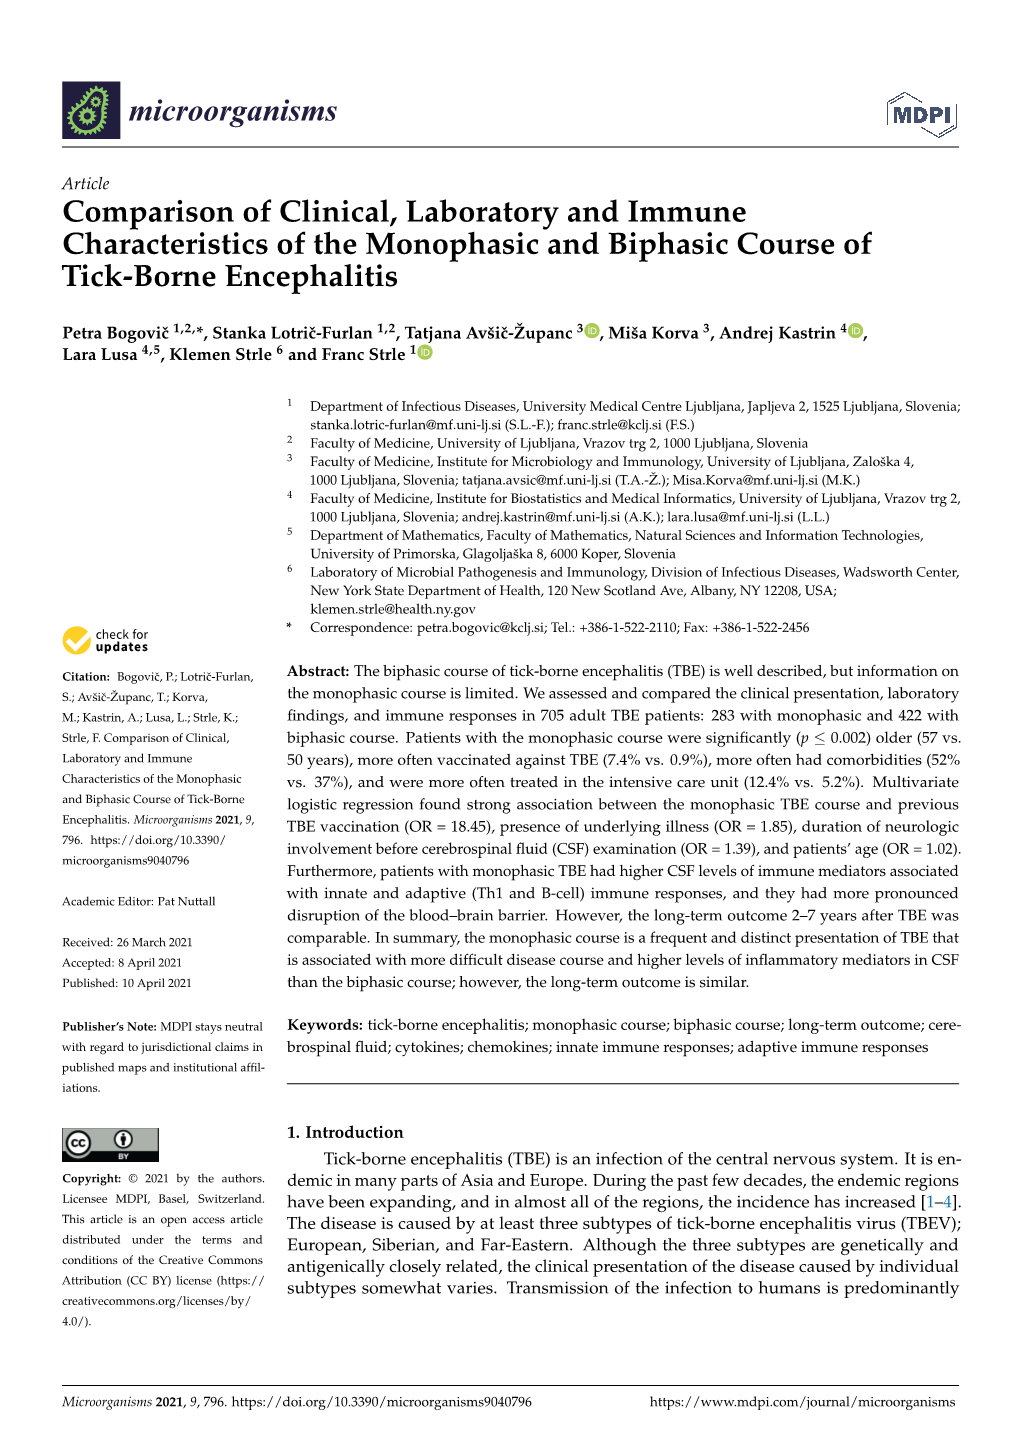 Comparison of Clinical, Laboratory and Immune Characteristics of the Monophasic and Biphasic Course of Tick-Borne Encephalitis